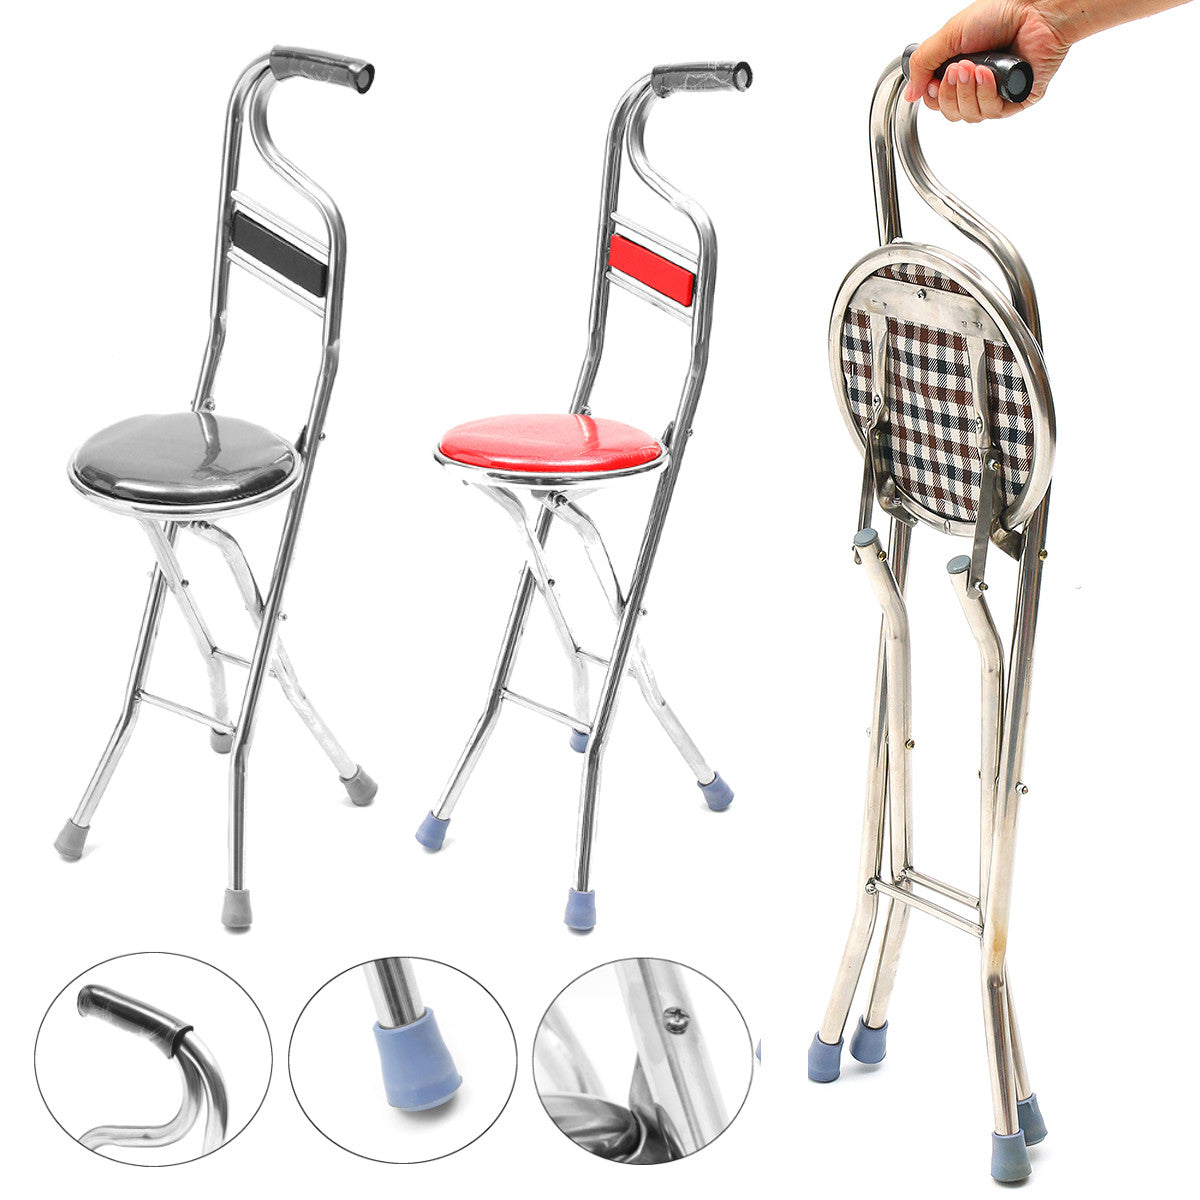 PortaSeat™ Stainless Steel Portable Folding Chair Seat Stool